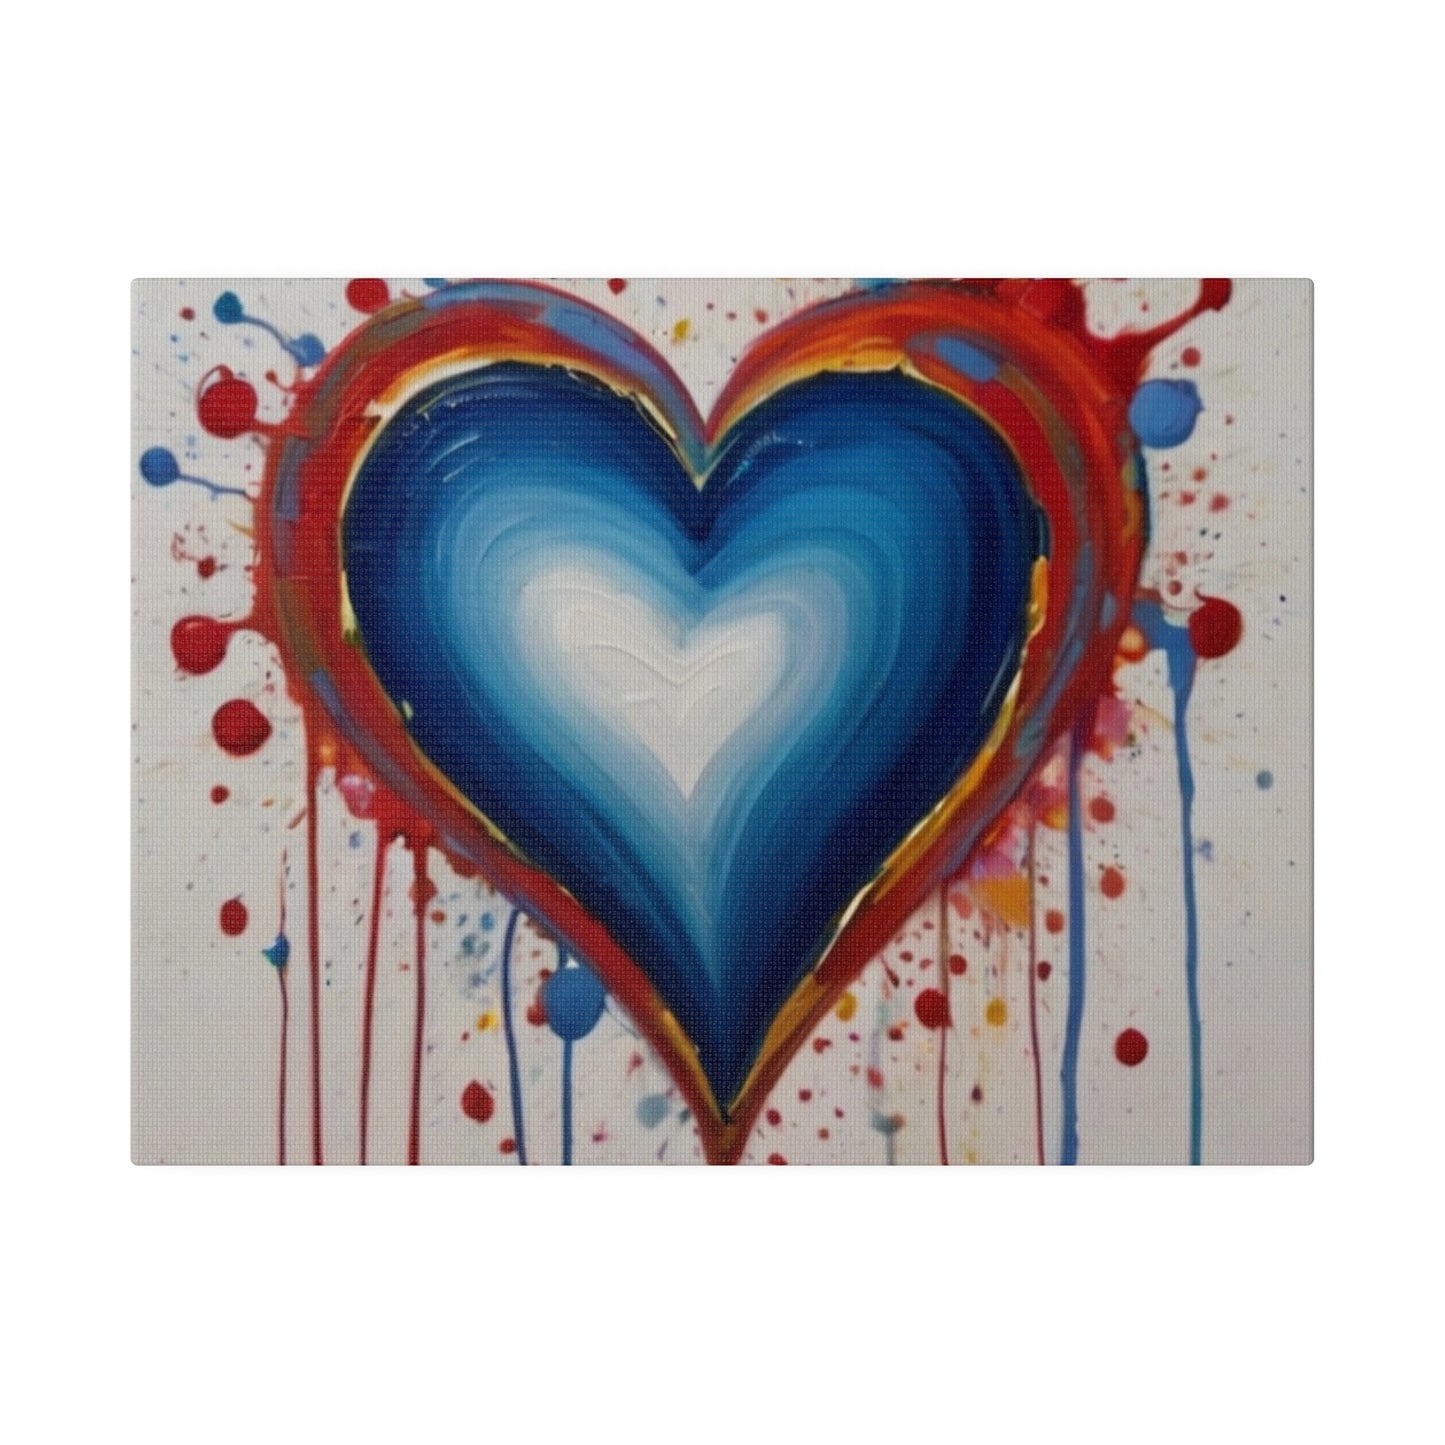 Dripping Blue Love Hearts - Matte Canvas, Stretched, 0.75"